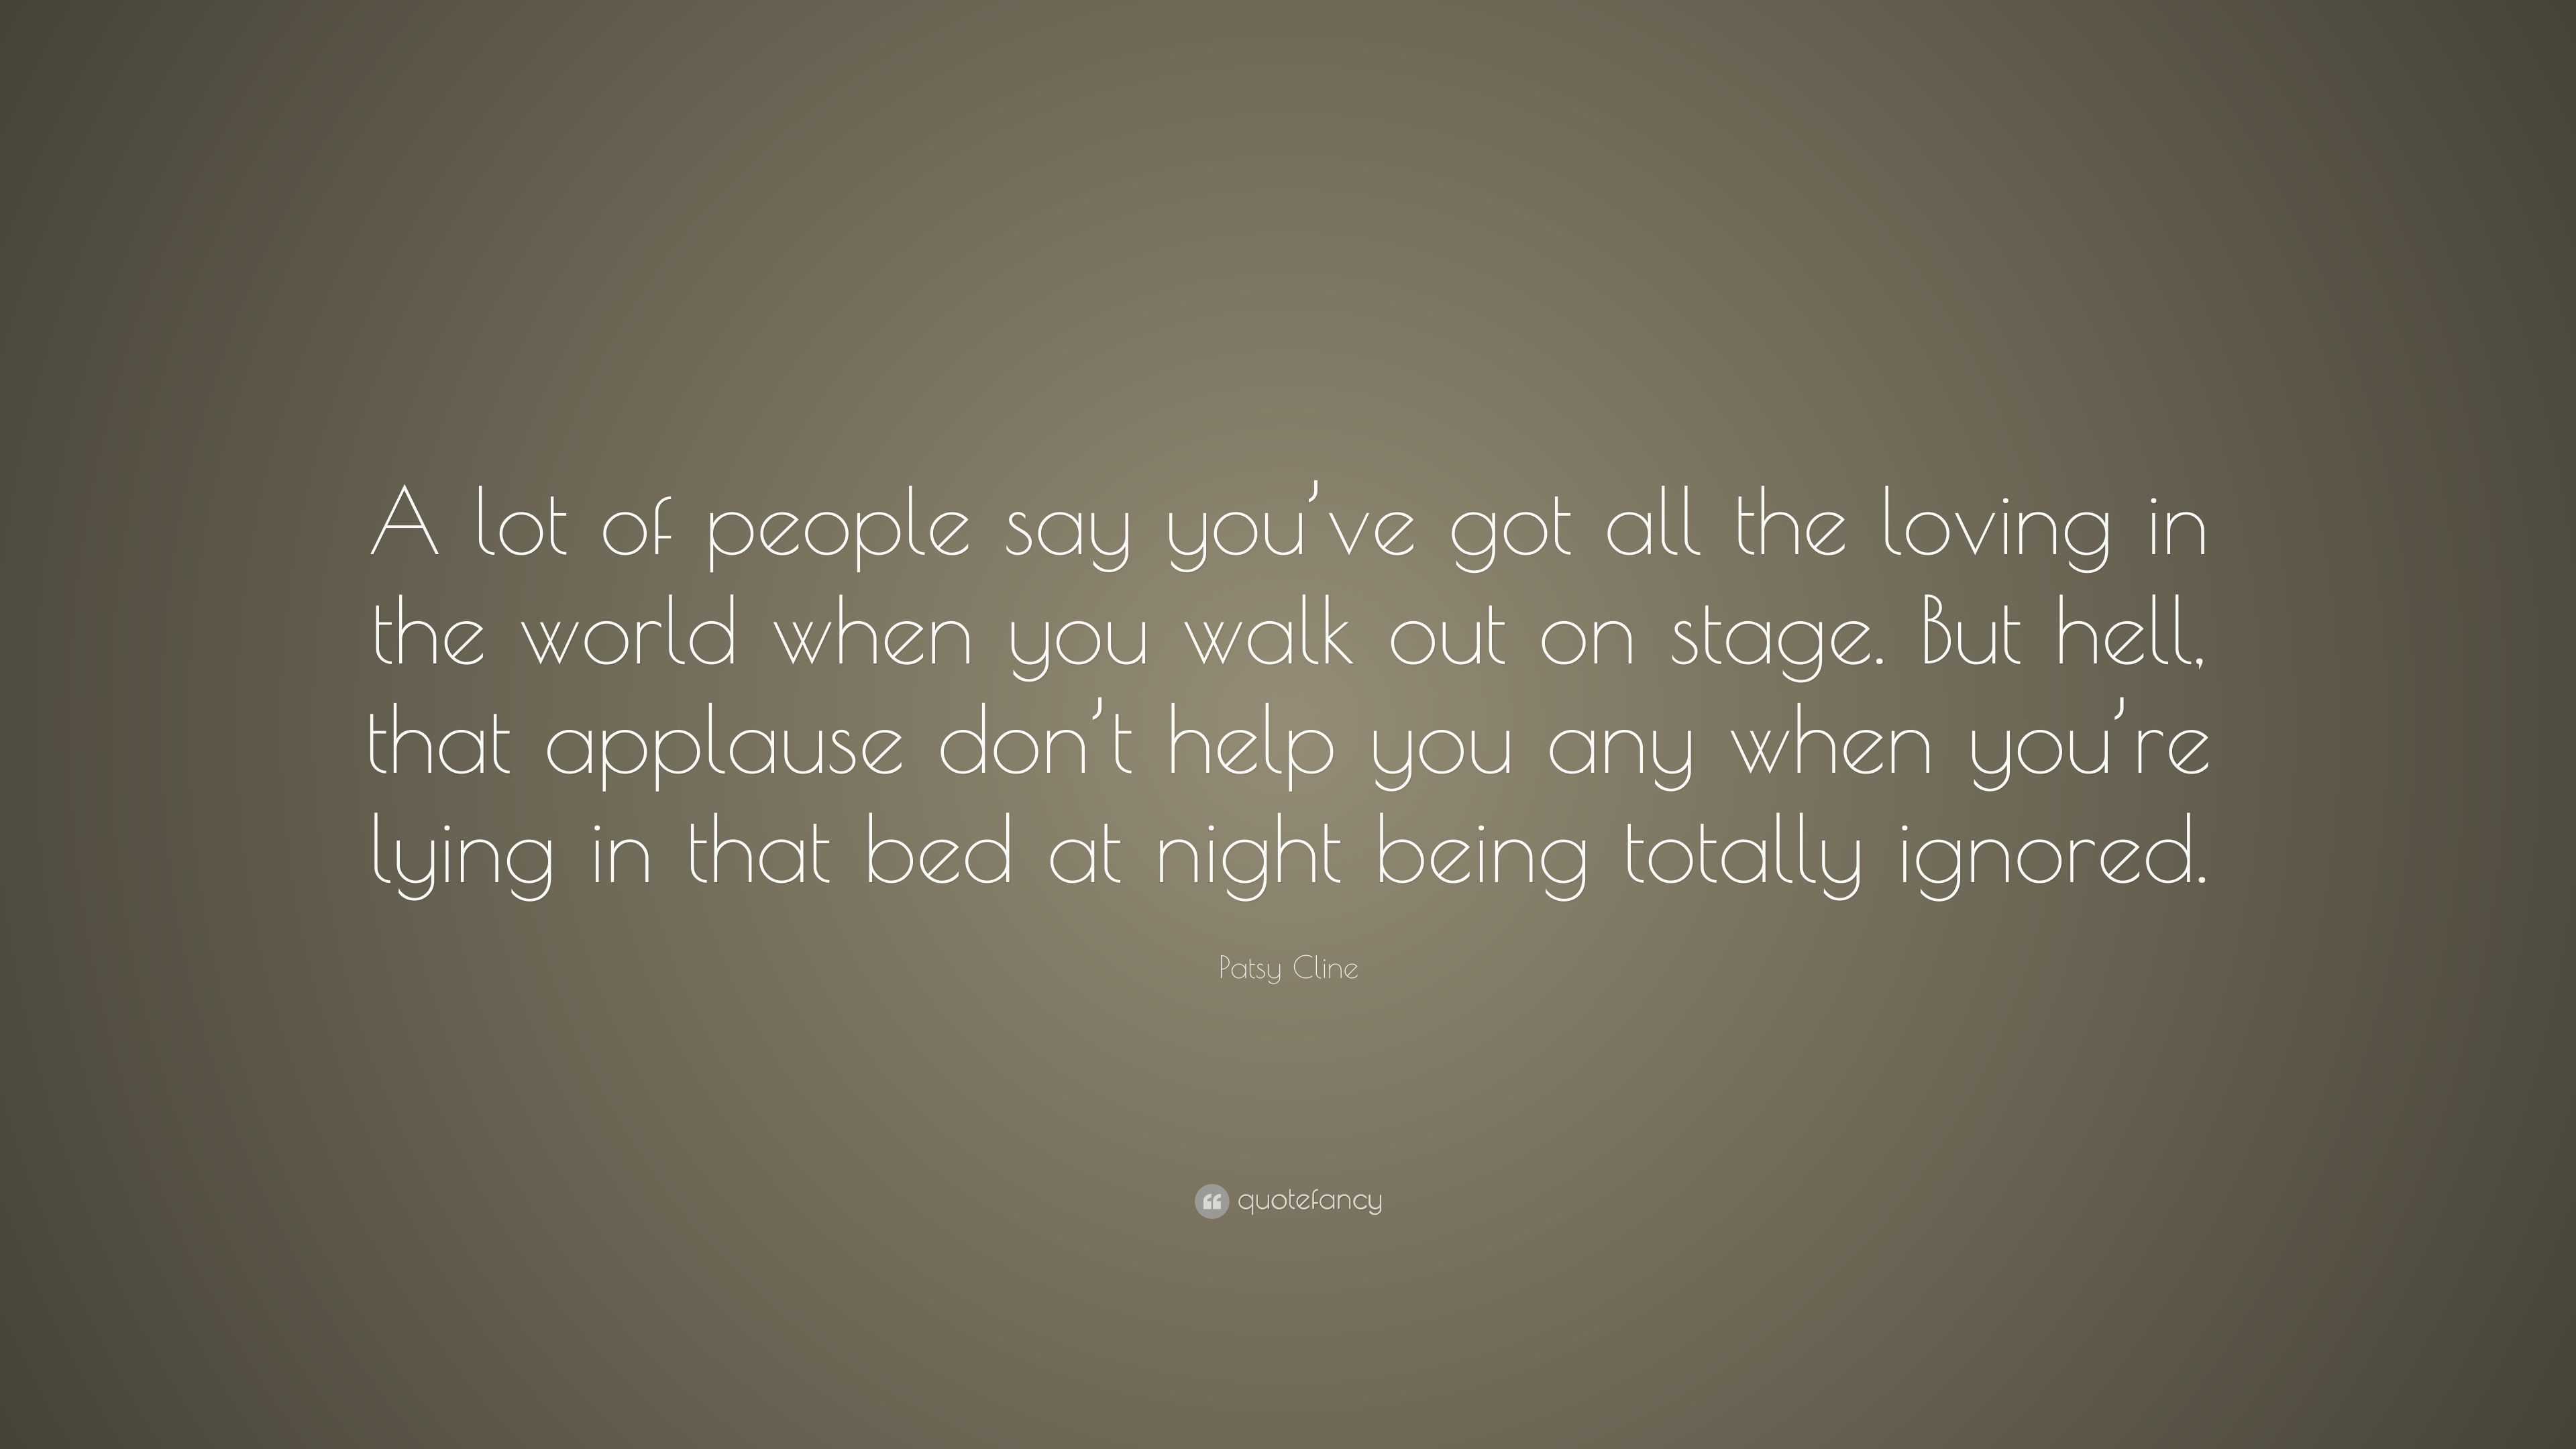 Patsy Cline Quote: “A lot of people say you’ve got all the loving in ...